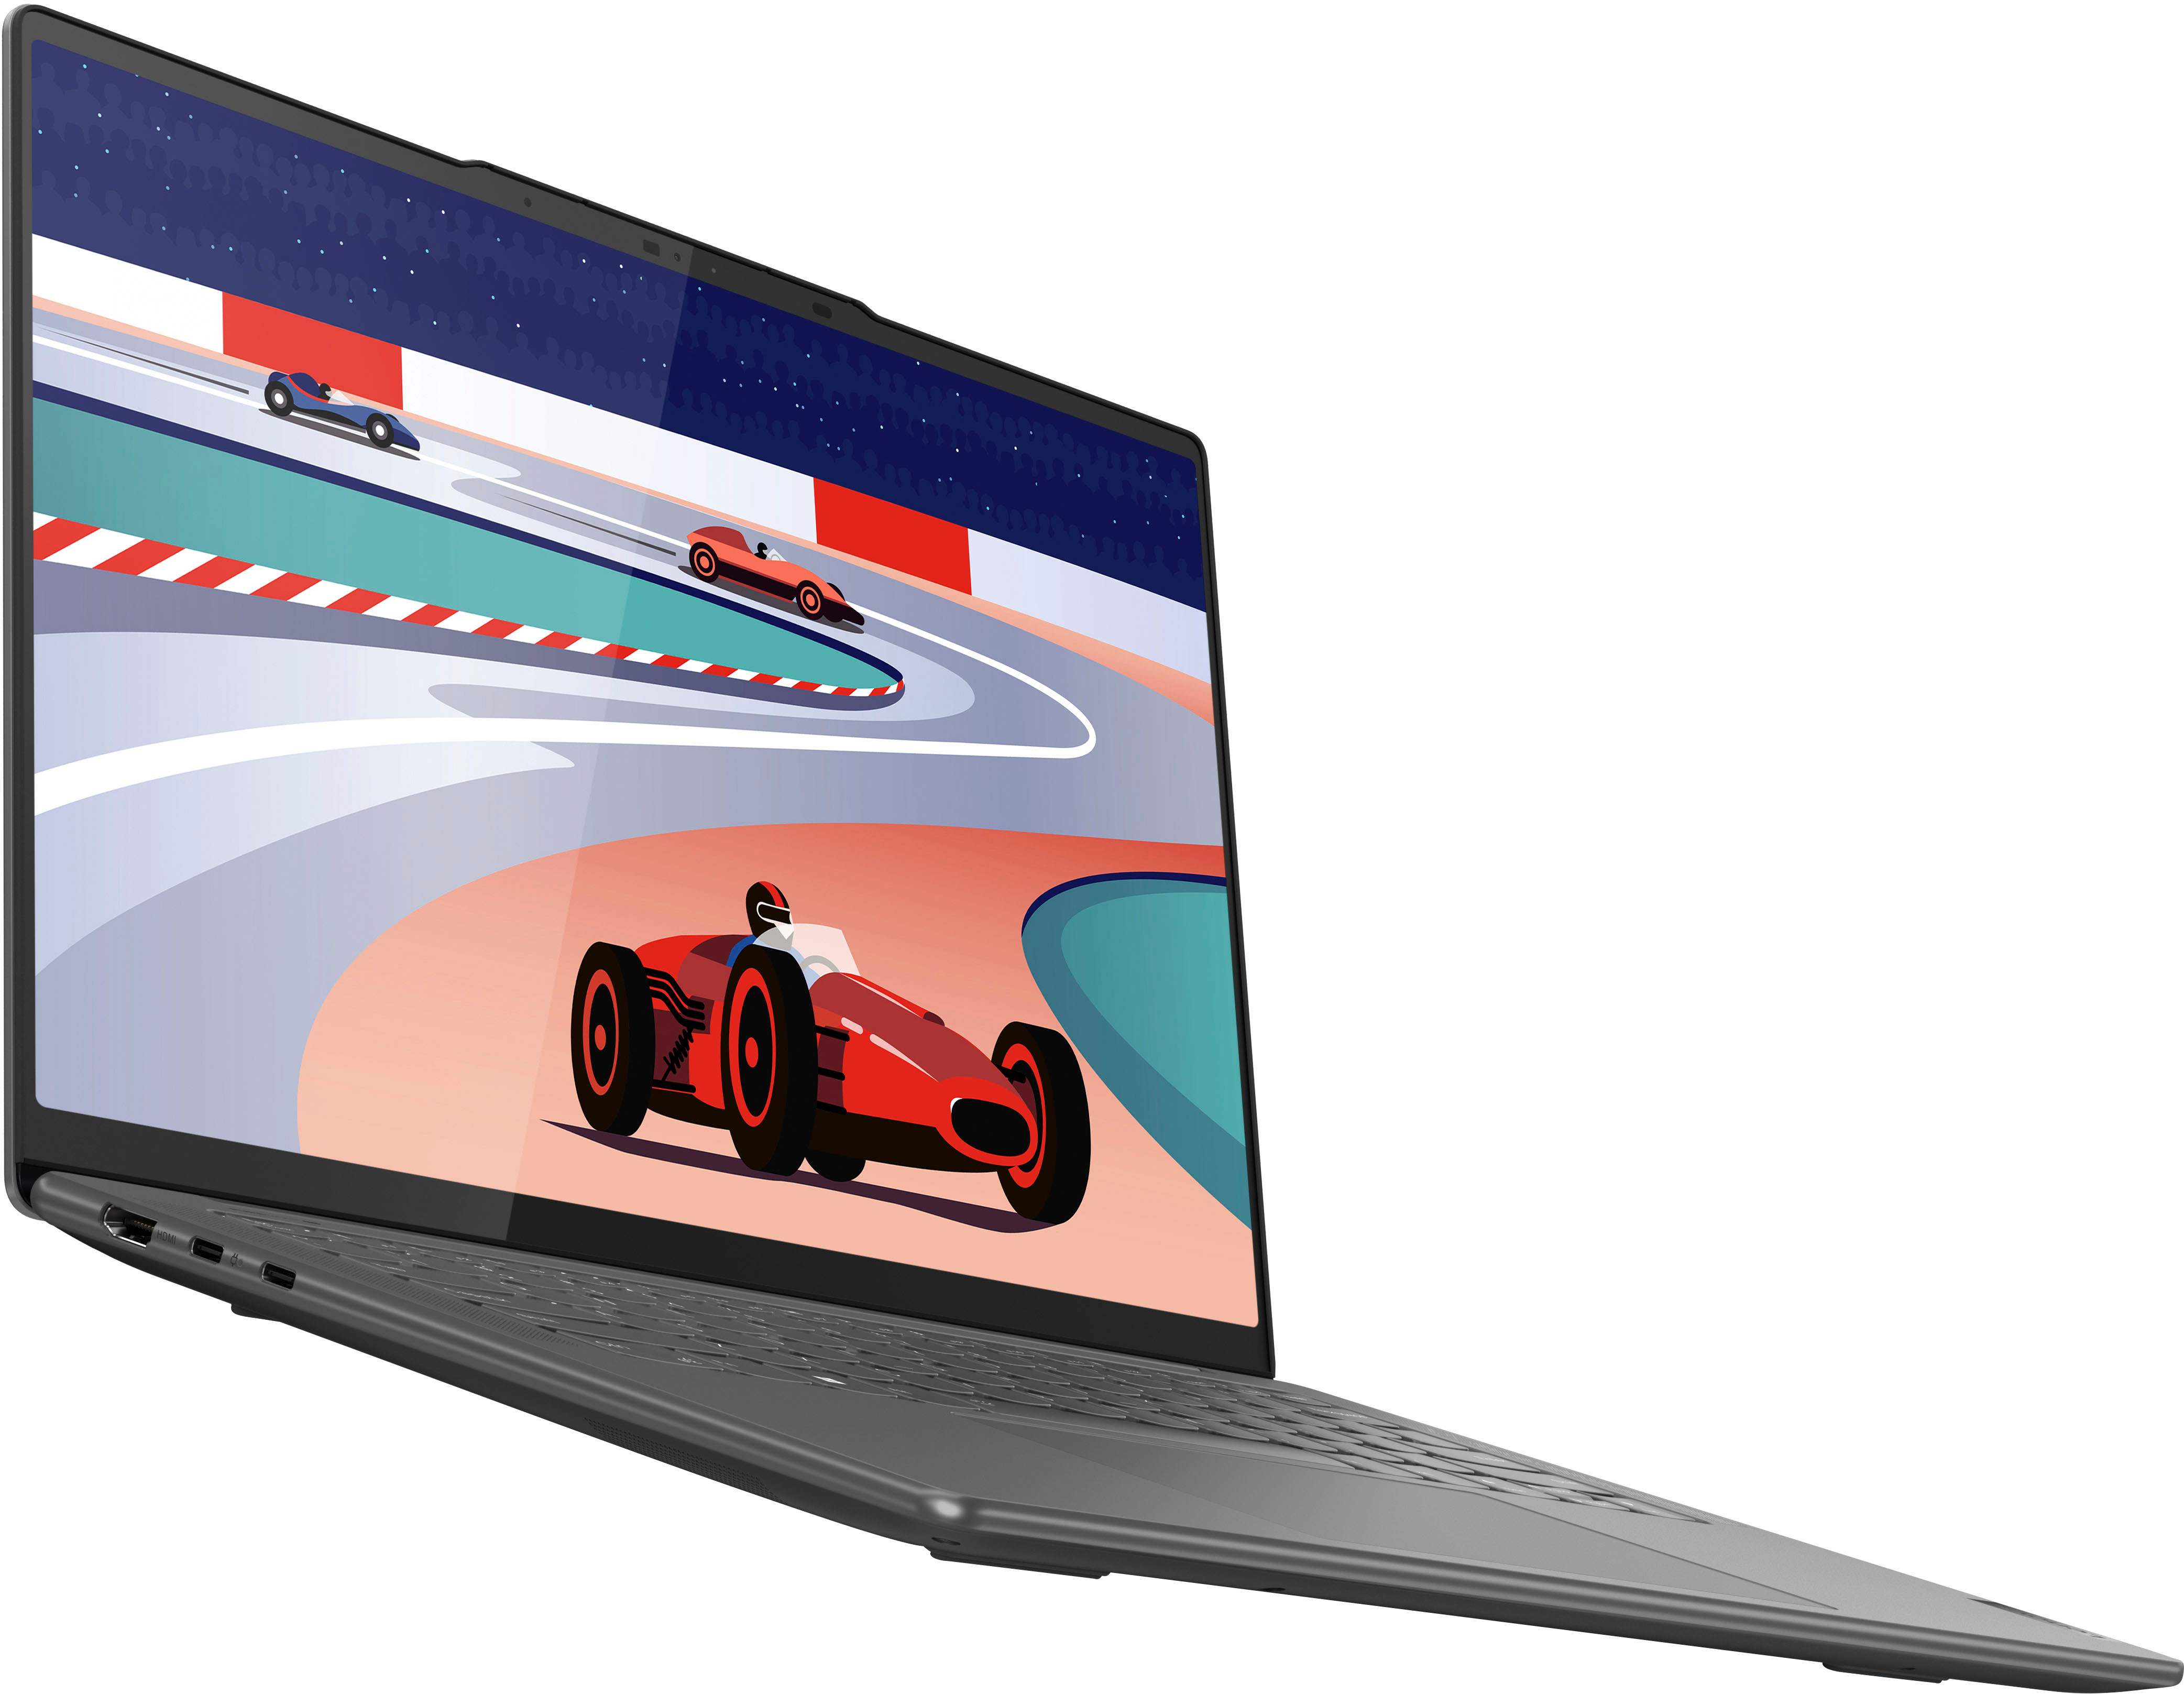 Lenovo Yoga Slim 7 Pro: New 16-inch model revealed with AMD Ryzen 6000HS  Creator Edition APUs, a choice of NVIDIA GeForce RTX GPUs and a 165 Hz  display -  News